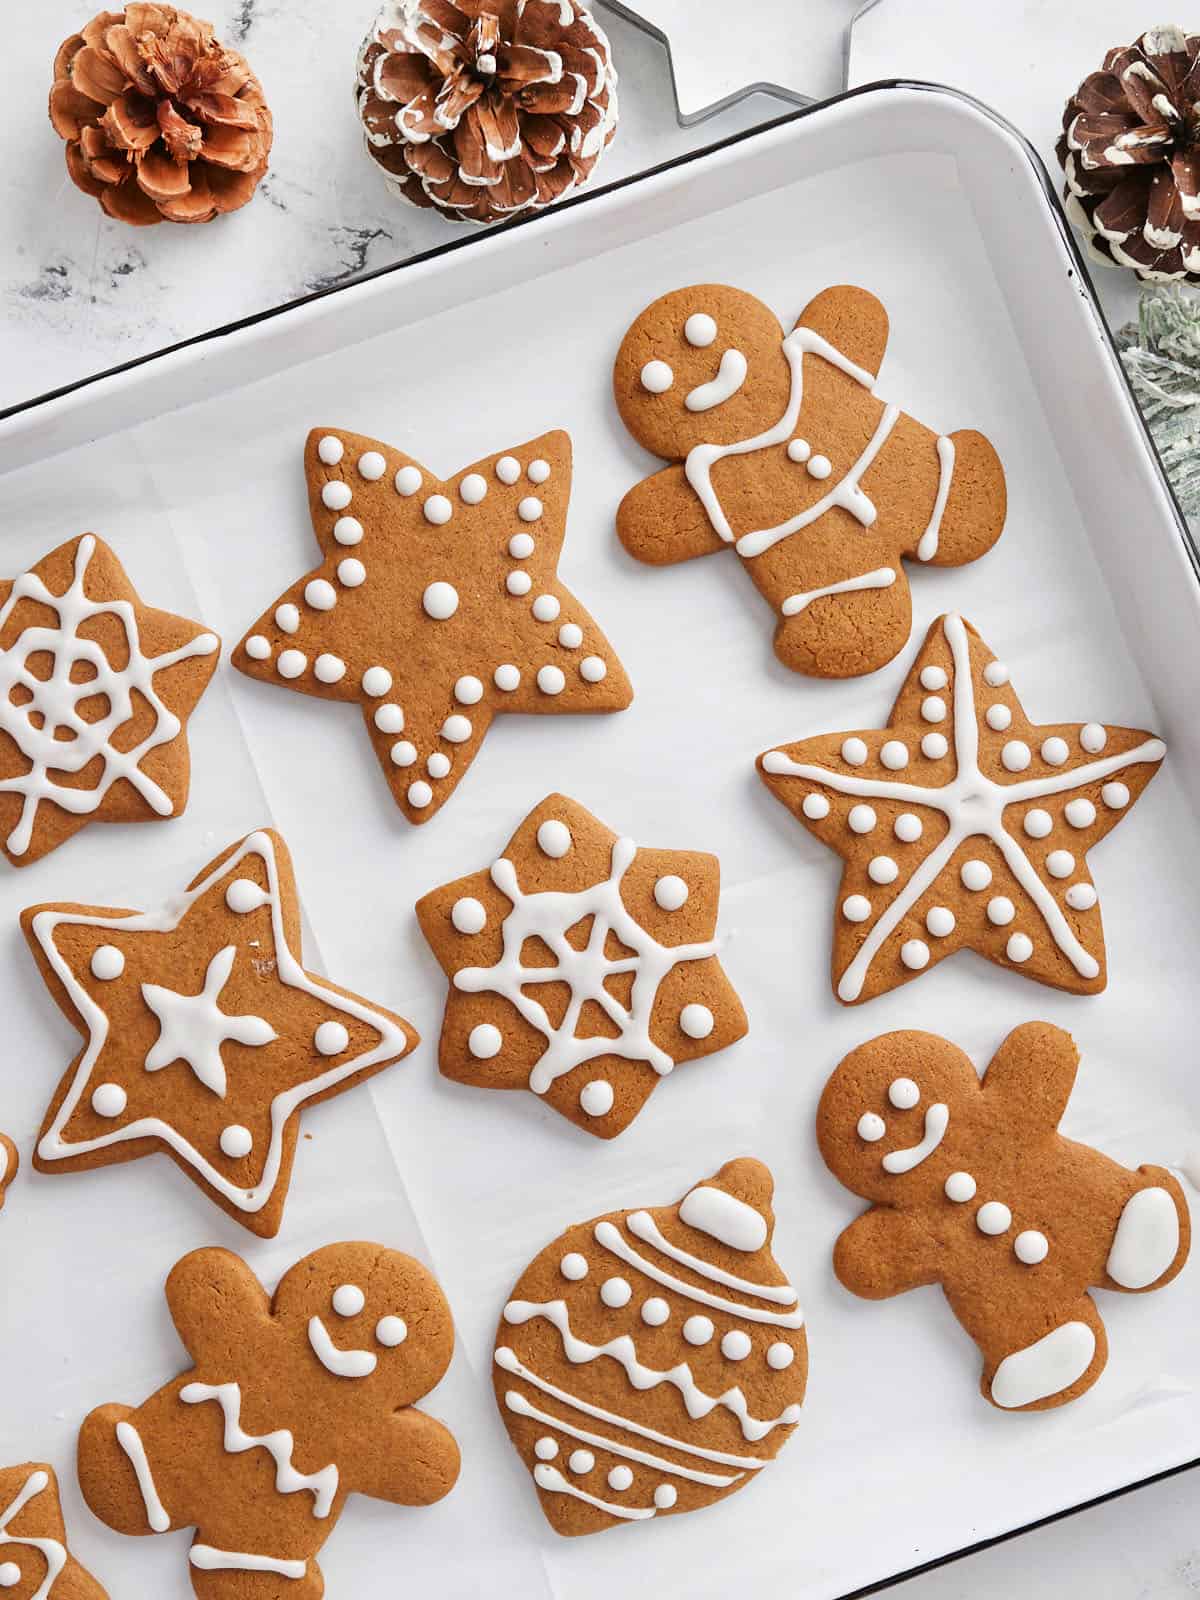 Decorated gingerbread cookies on a baking sheet surrounded by pinecones.